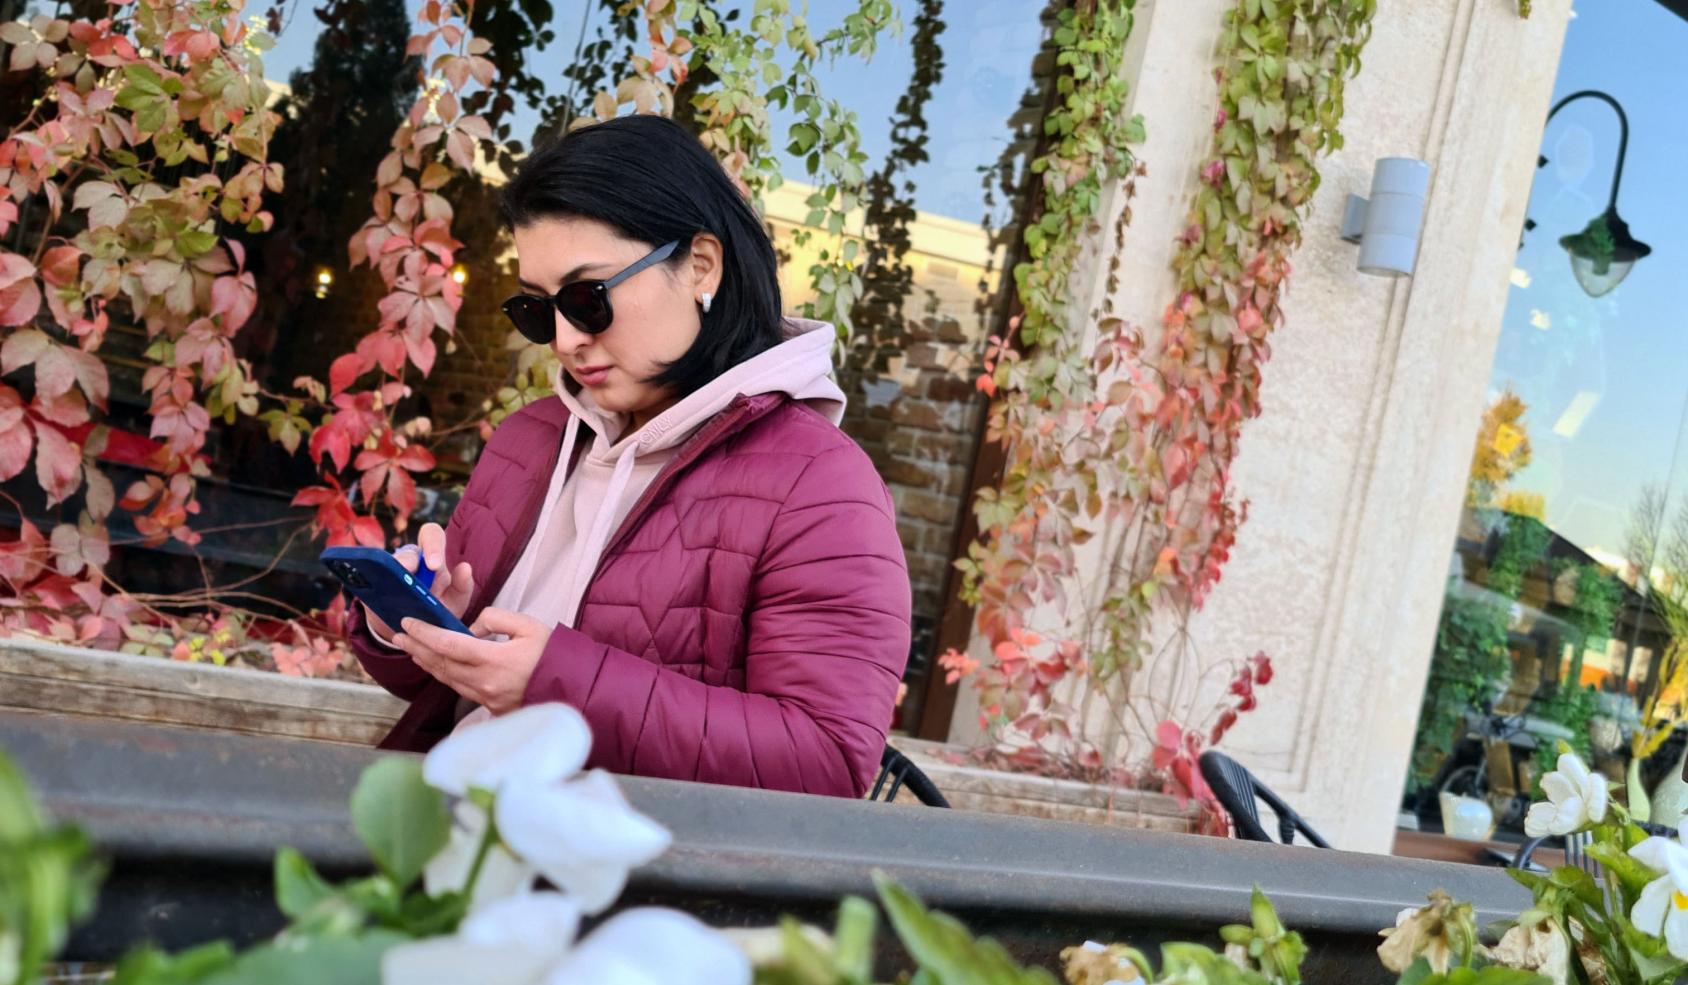 Aqida Mokhirova stands reading messages on her mobile phone as she stands outside a local business window covered with blooming flowers and pink vines.